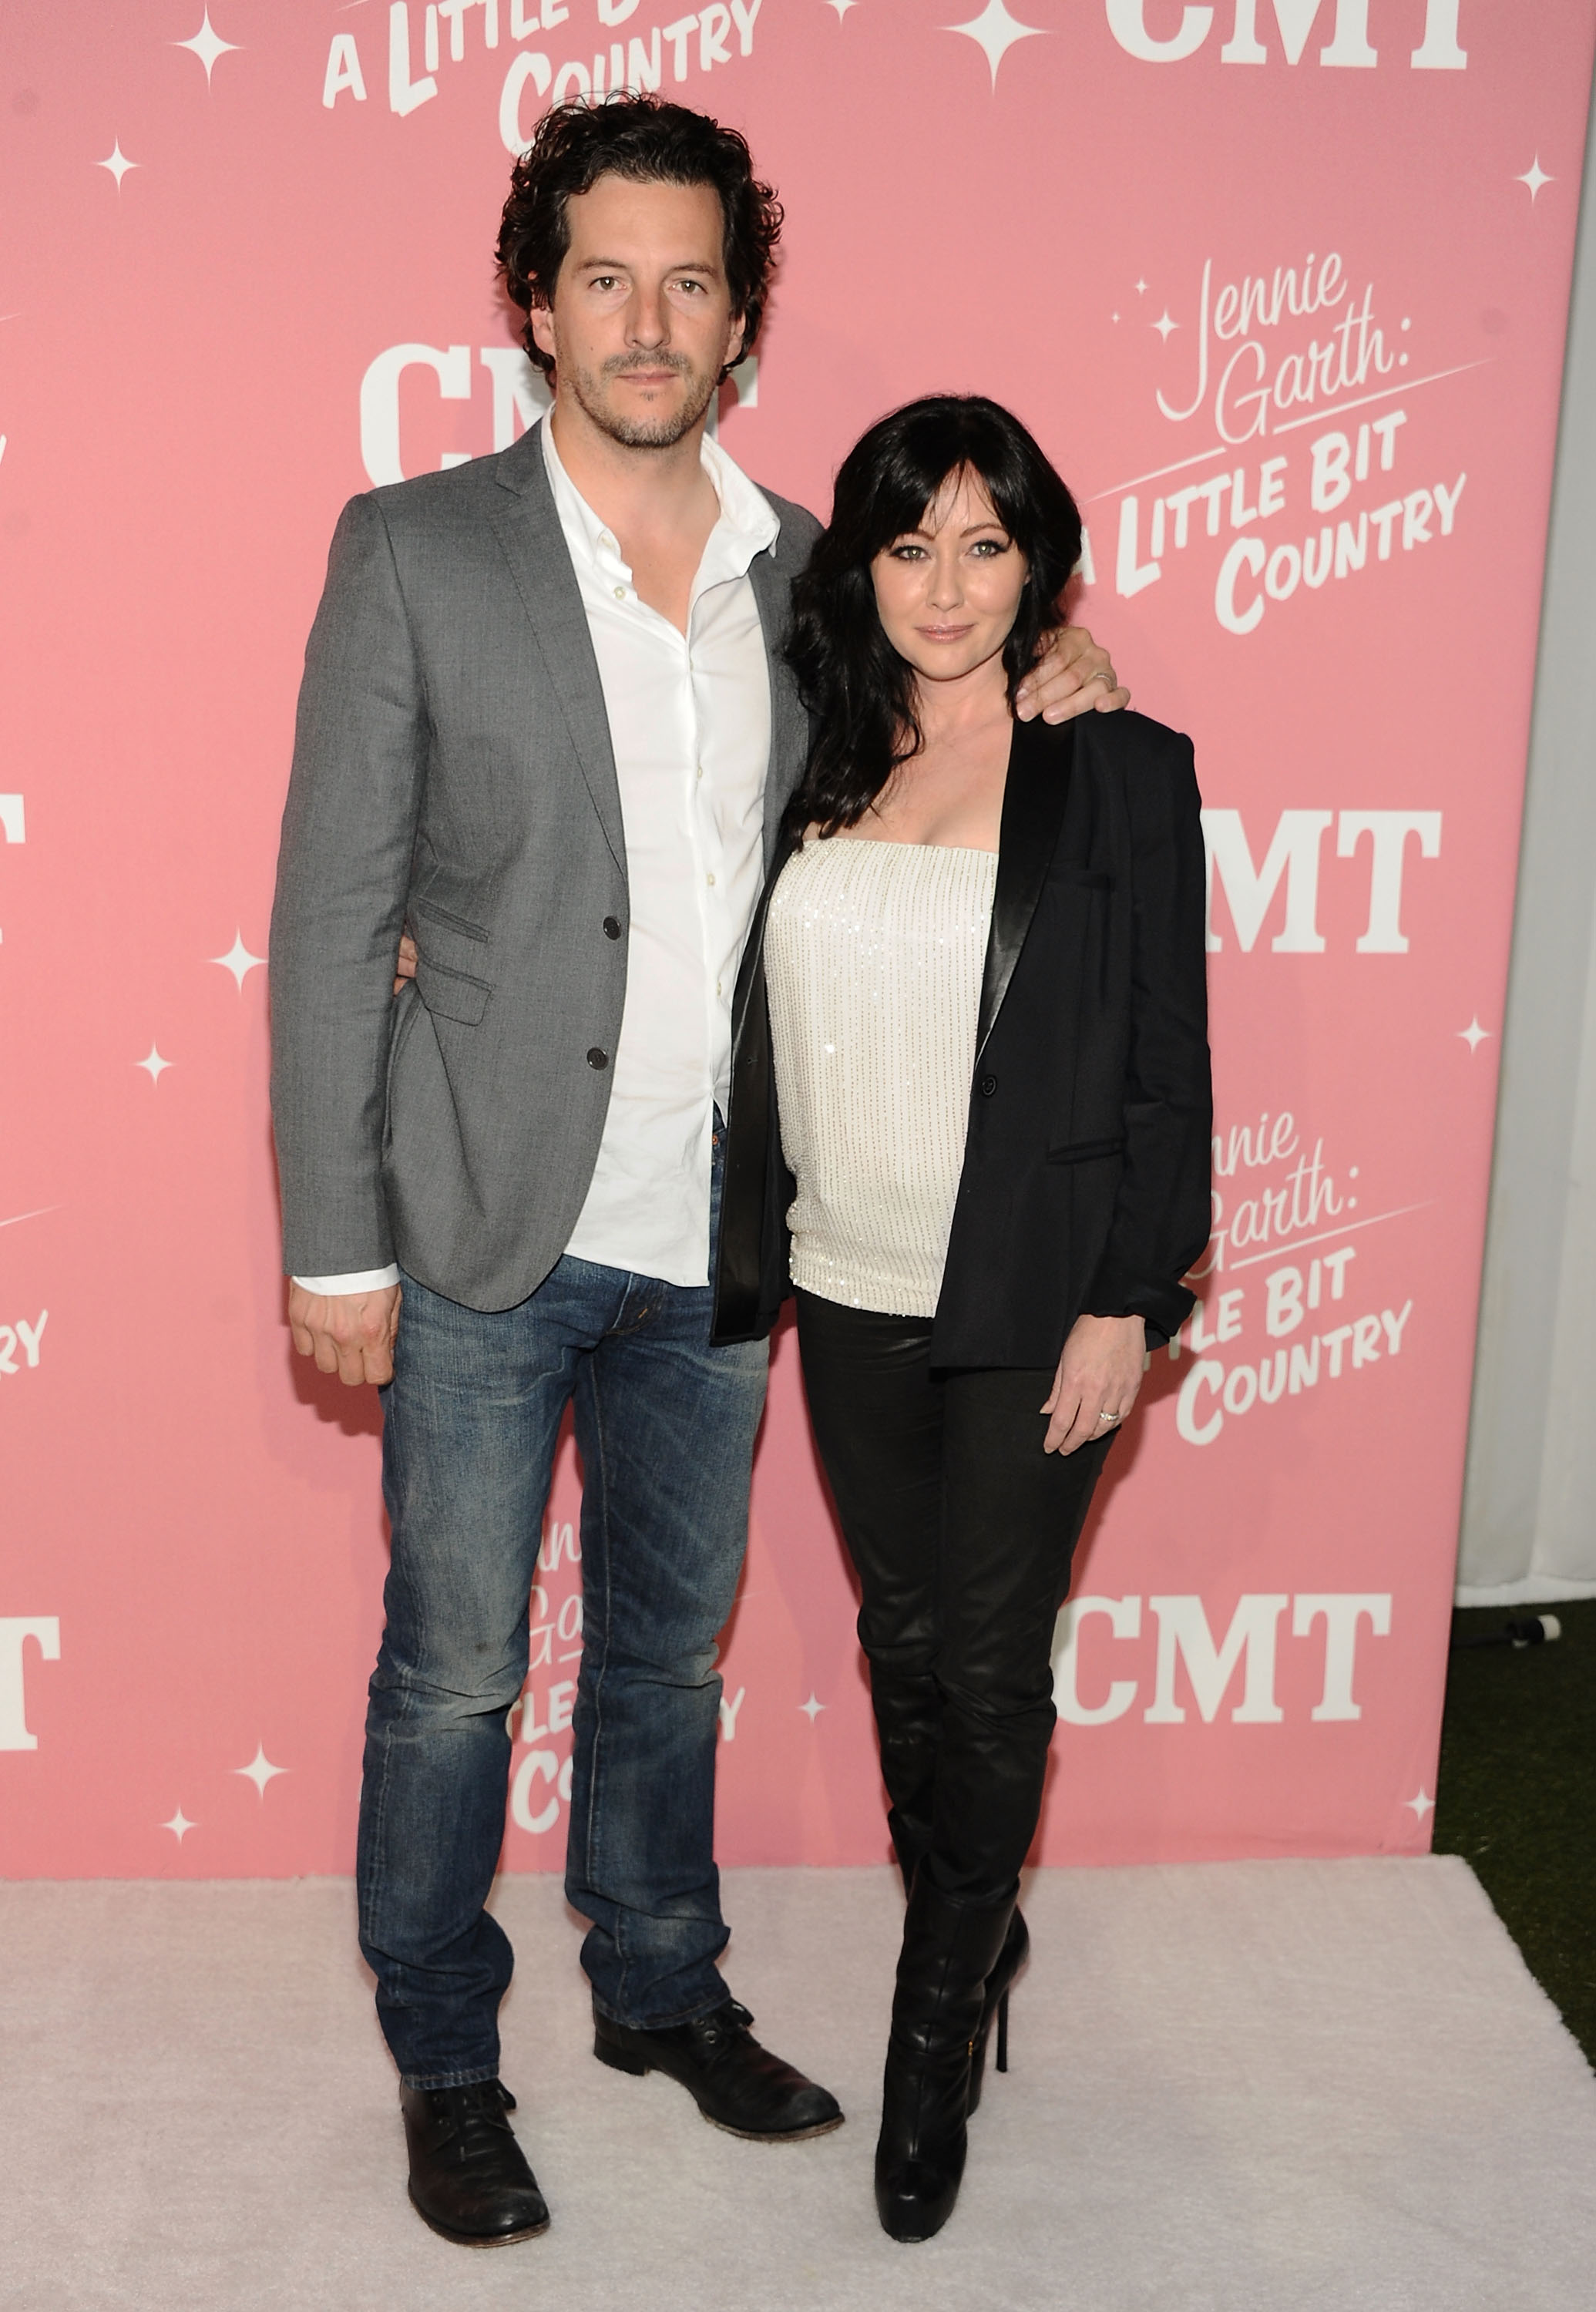 Shannen Doherty and Kurt Iswarienko attend Jennie Garth's 40th birthday celebration and premiere party for "Jennie Garth: A Little Bit Country" at The London Hotel in West Hollywood, California on April 19, 2012. | Source: Getty Images